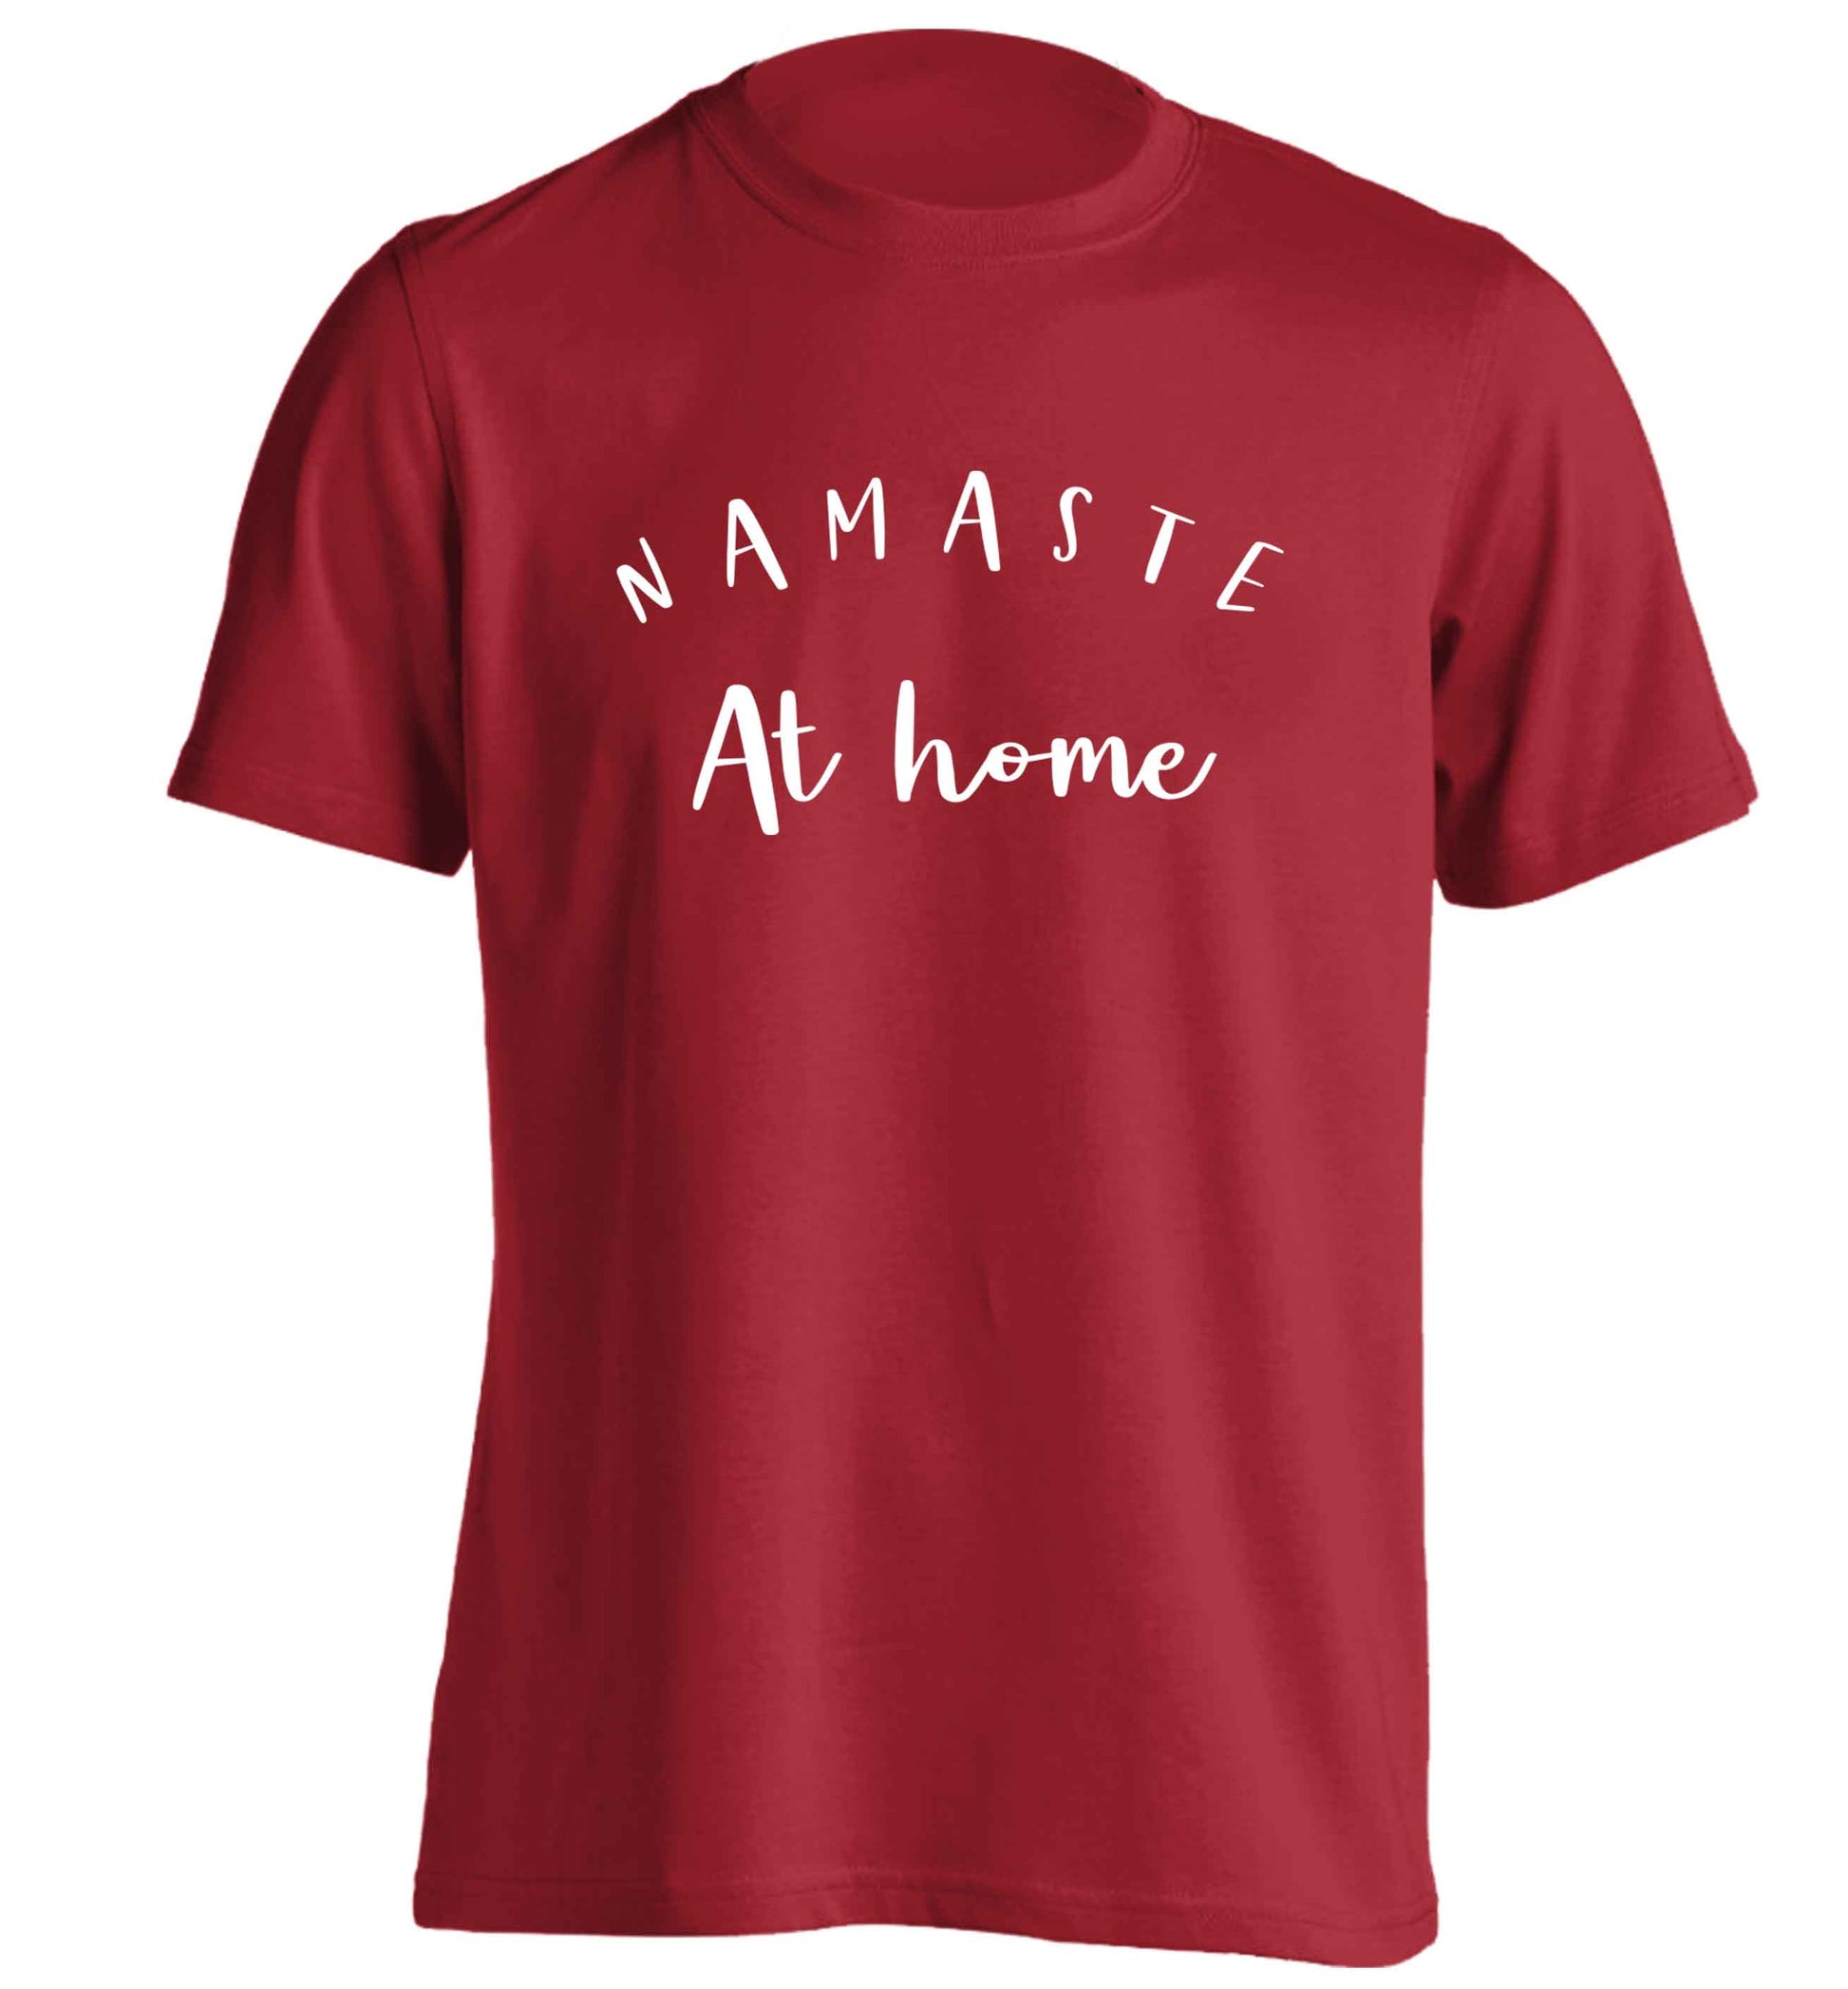 Namaste at home adults unisex red Tshirt 2XL